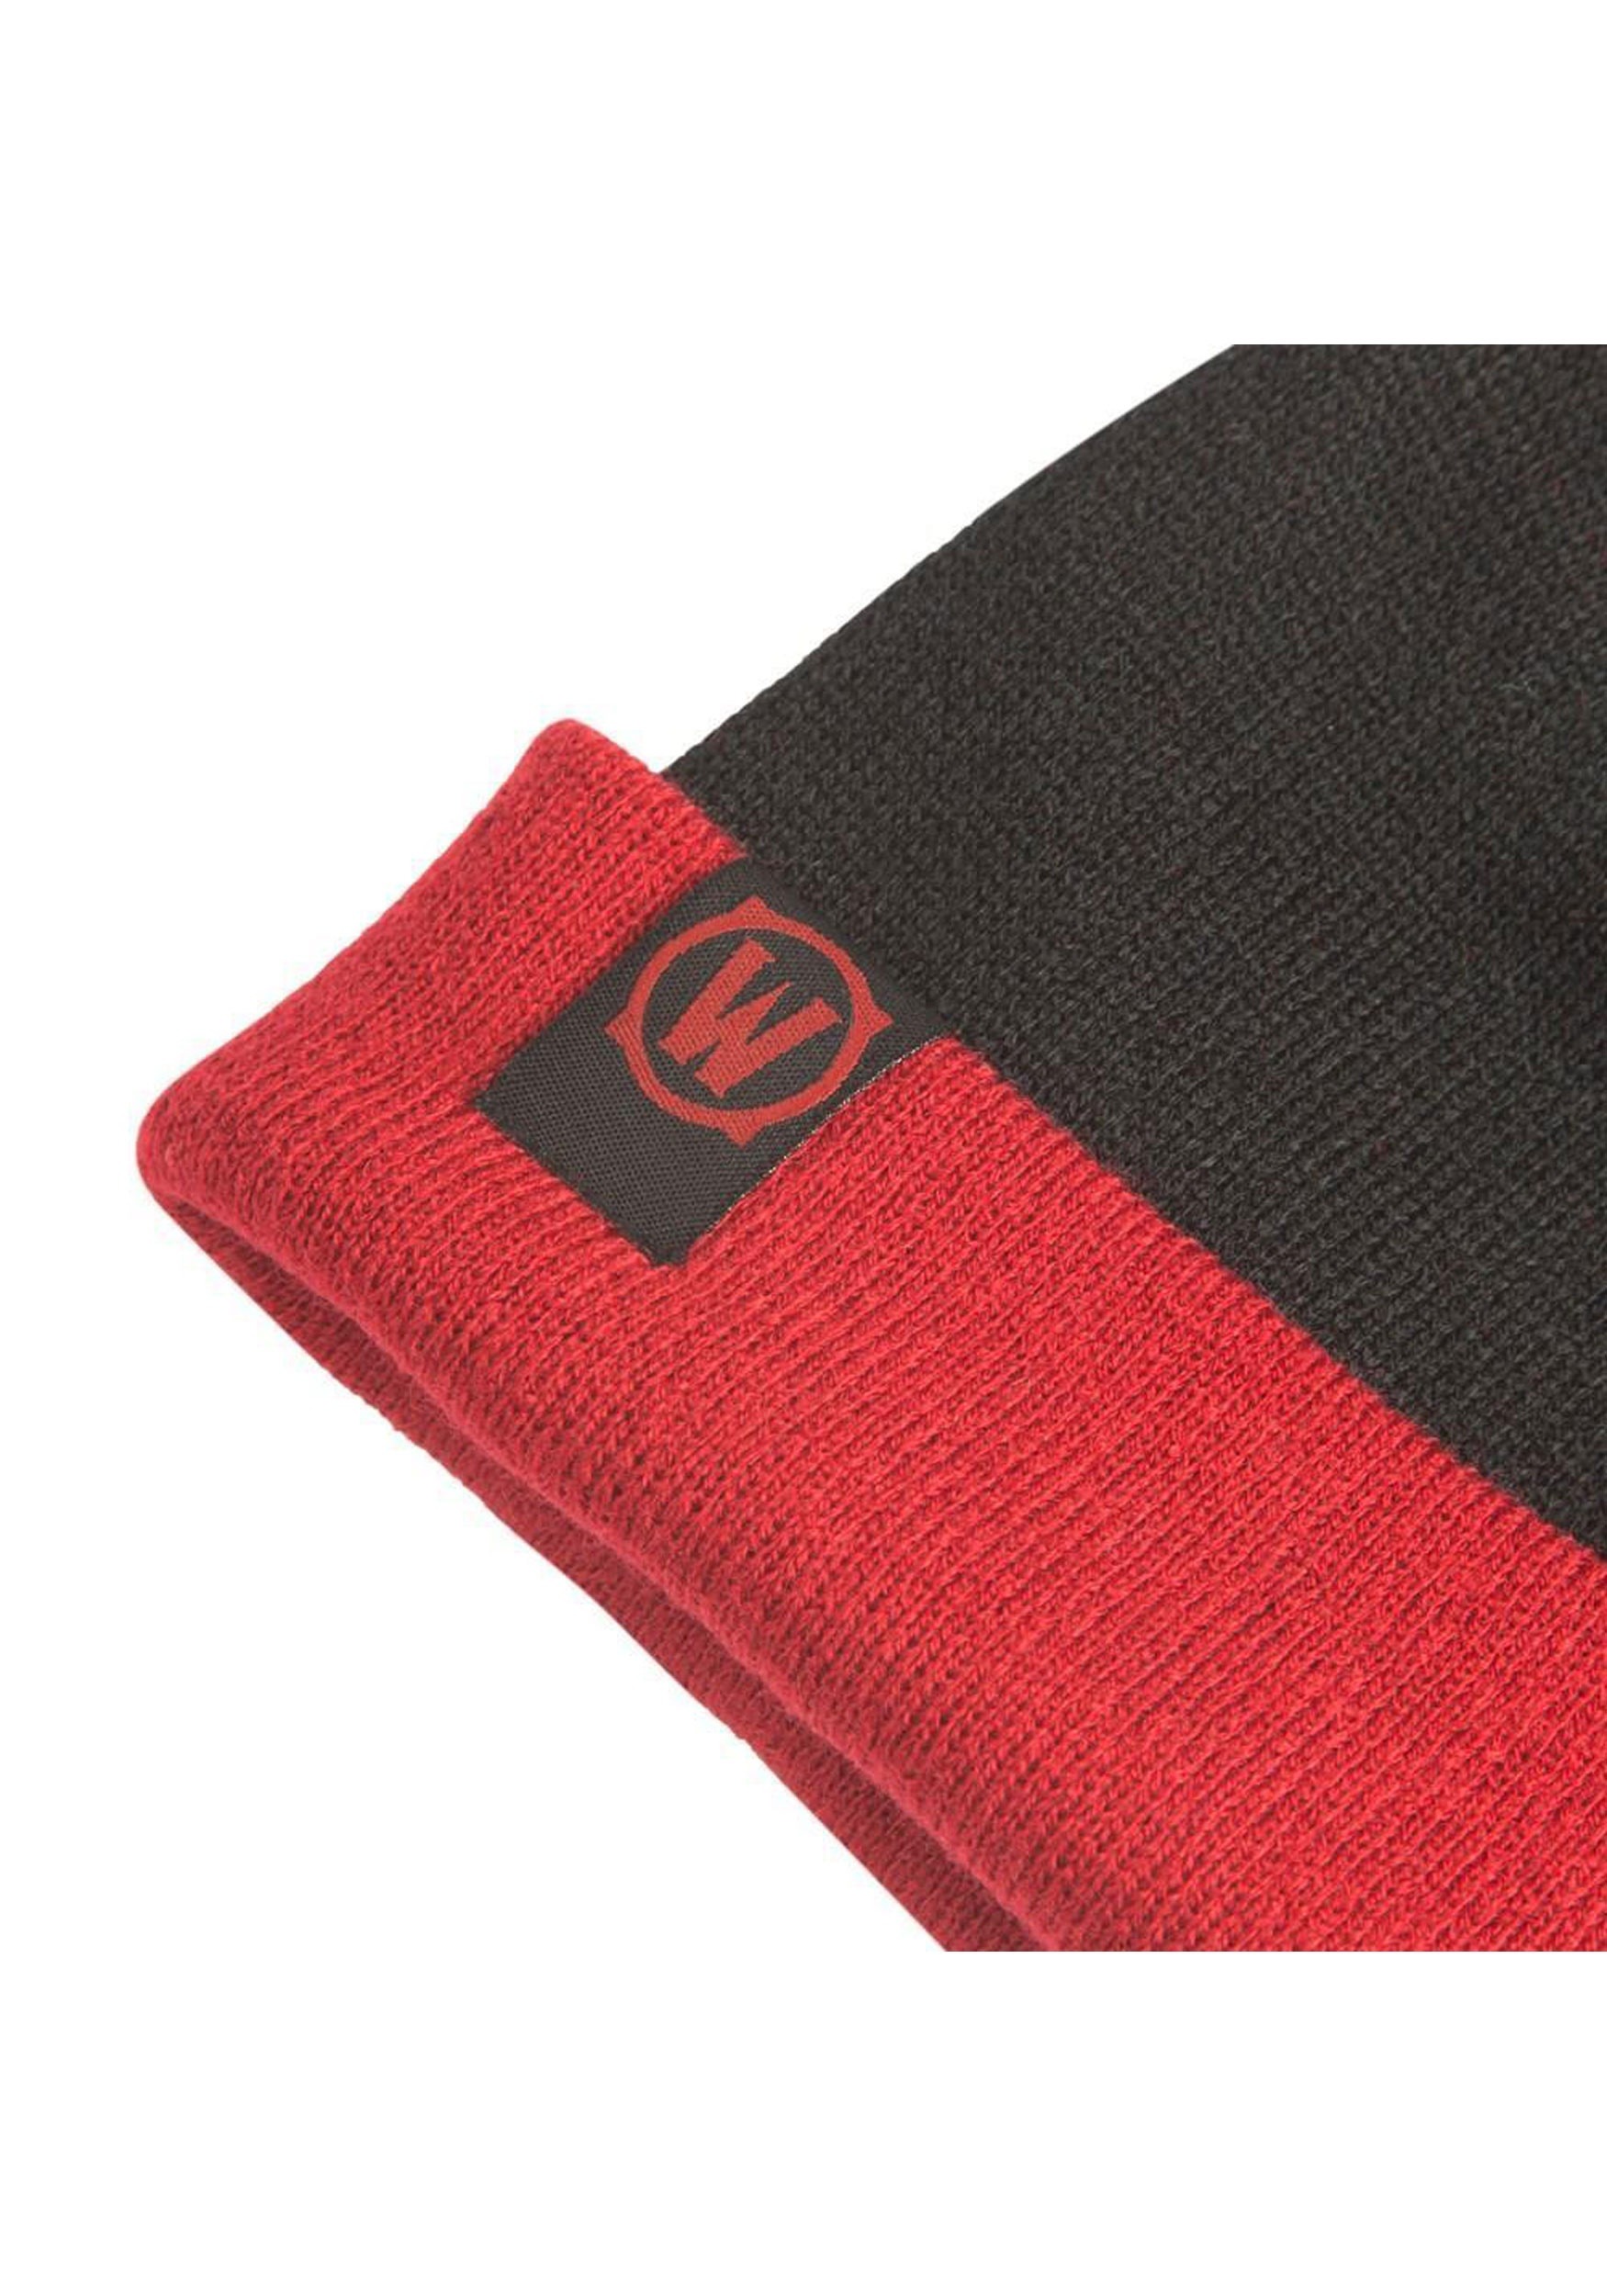 World of Warcraft Horde Pom Beanie for Adults